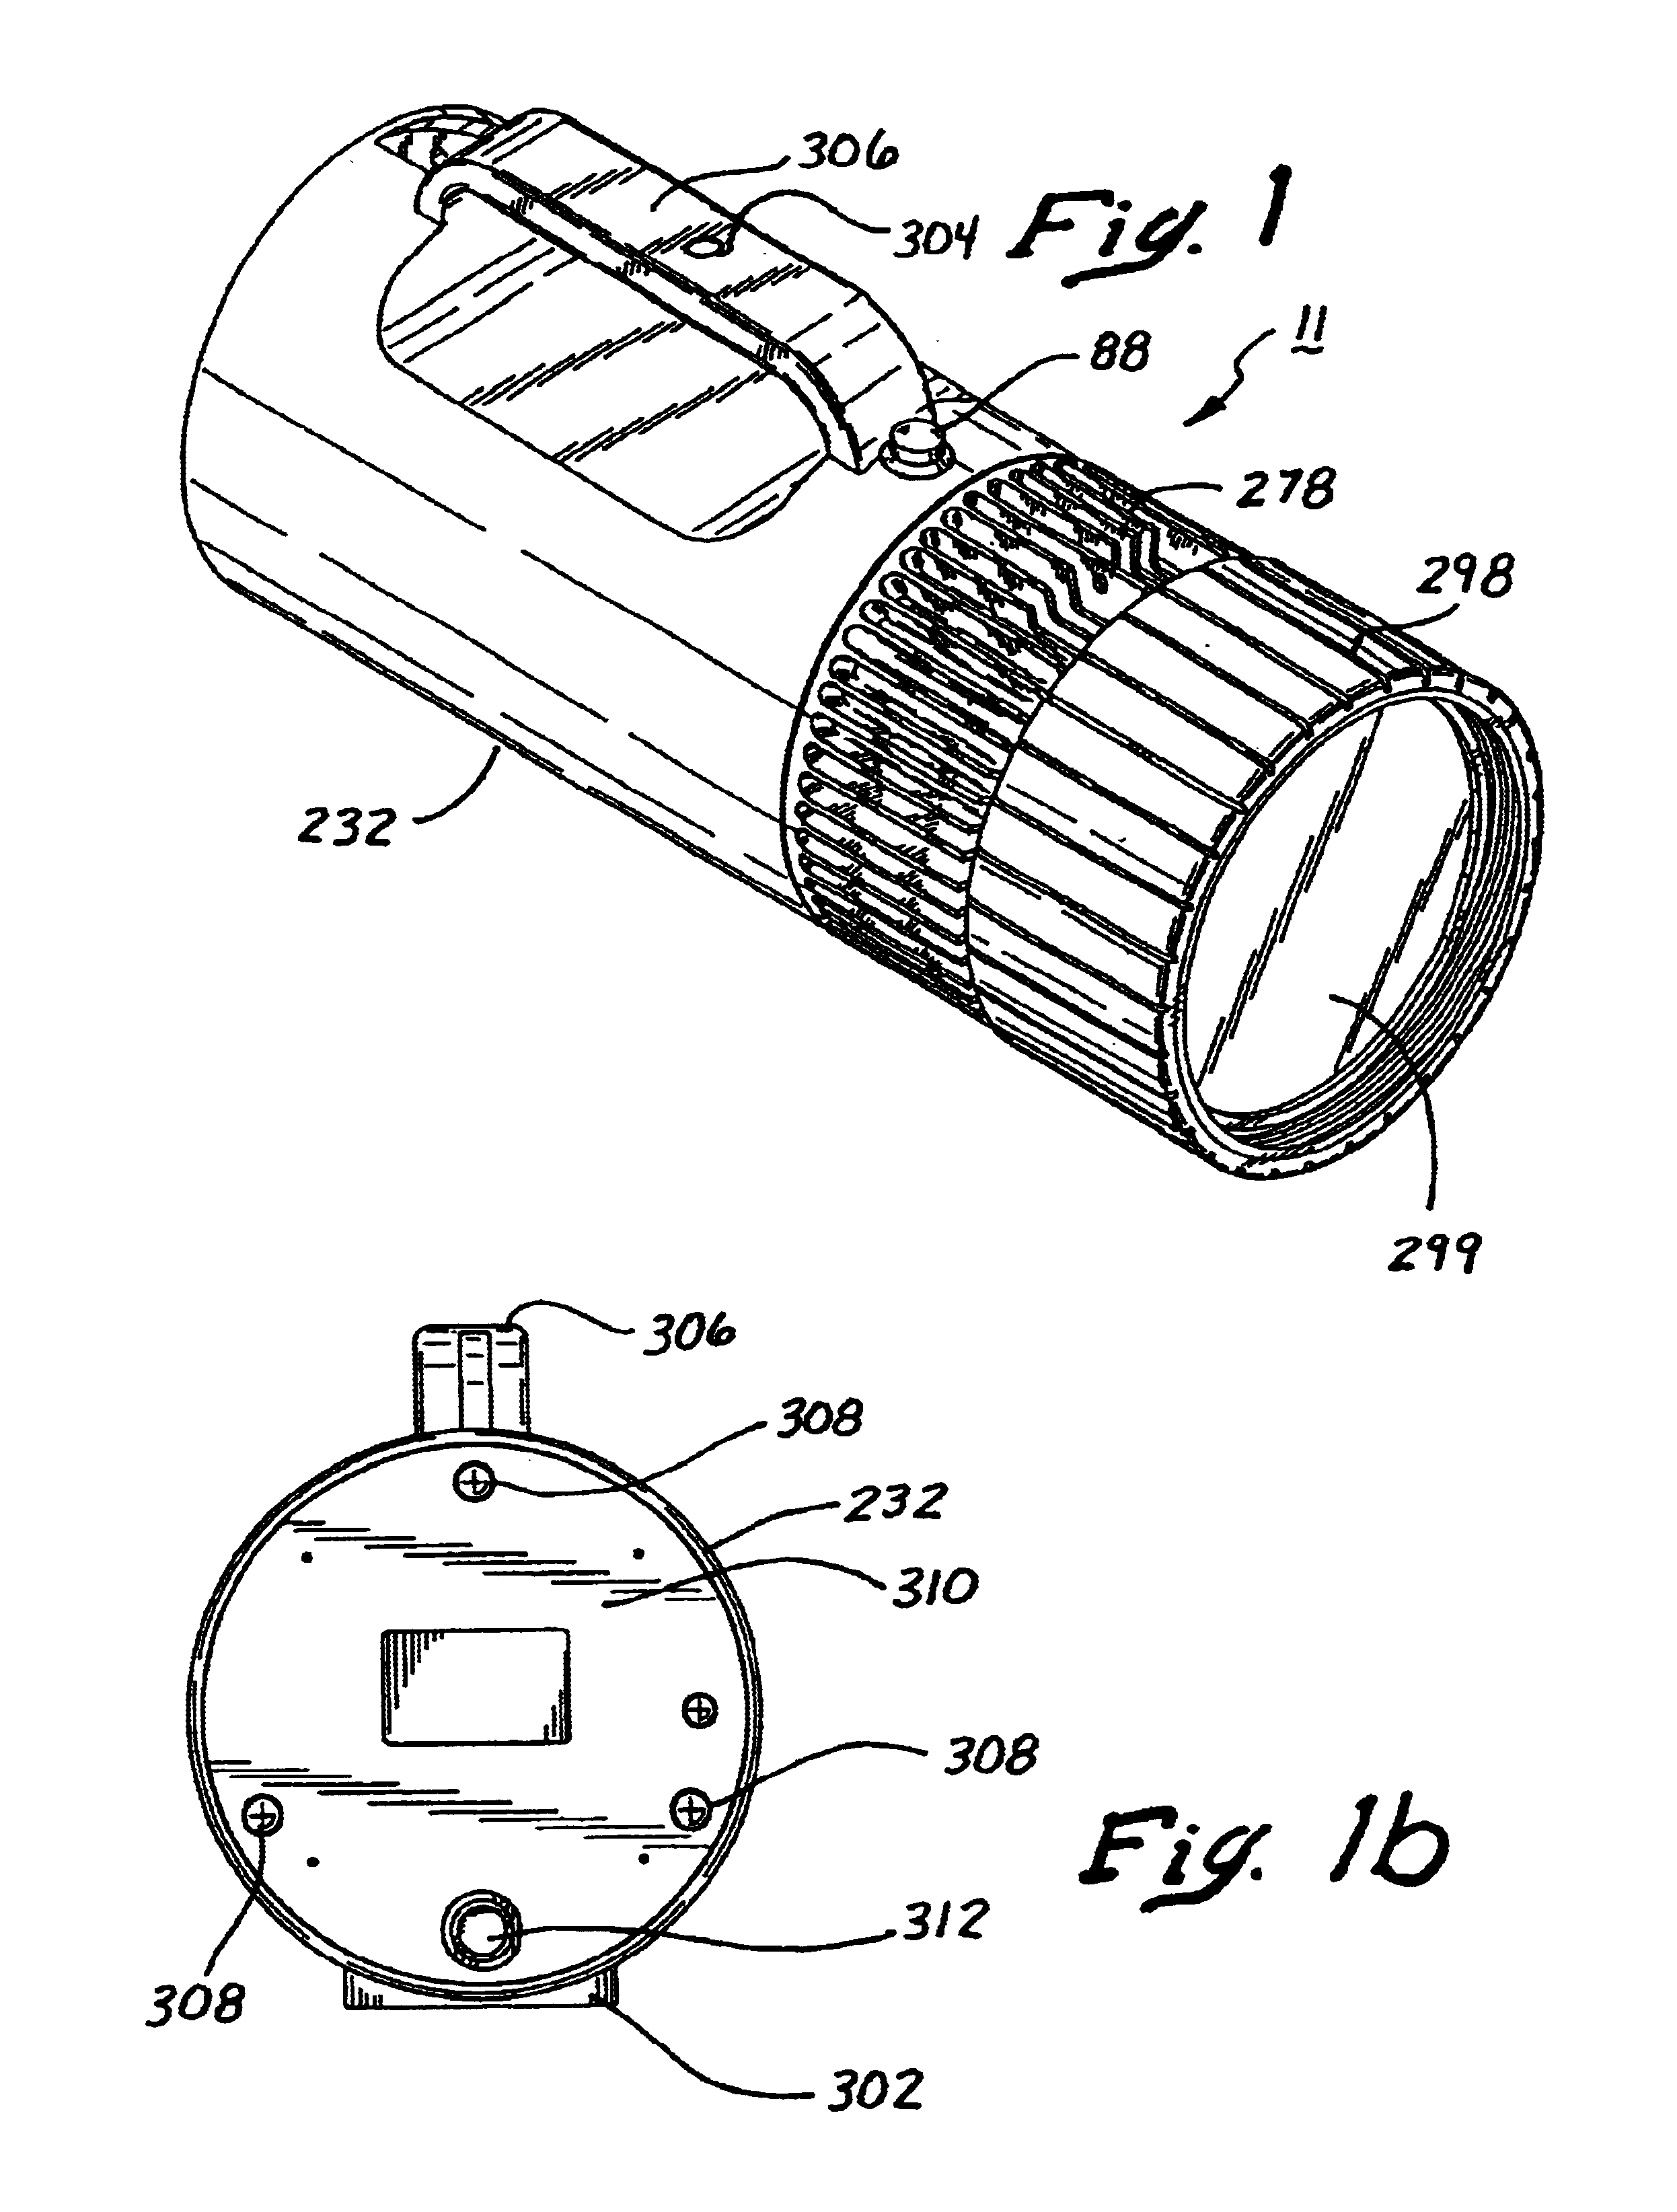 Apparatus and method for operating a portable xenon arc searchlight